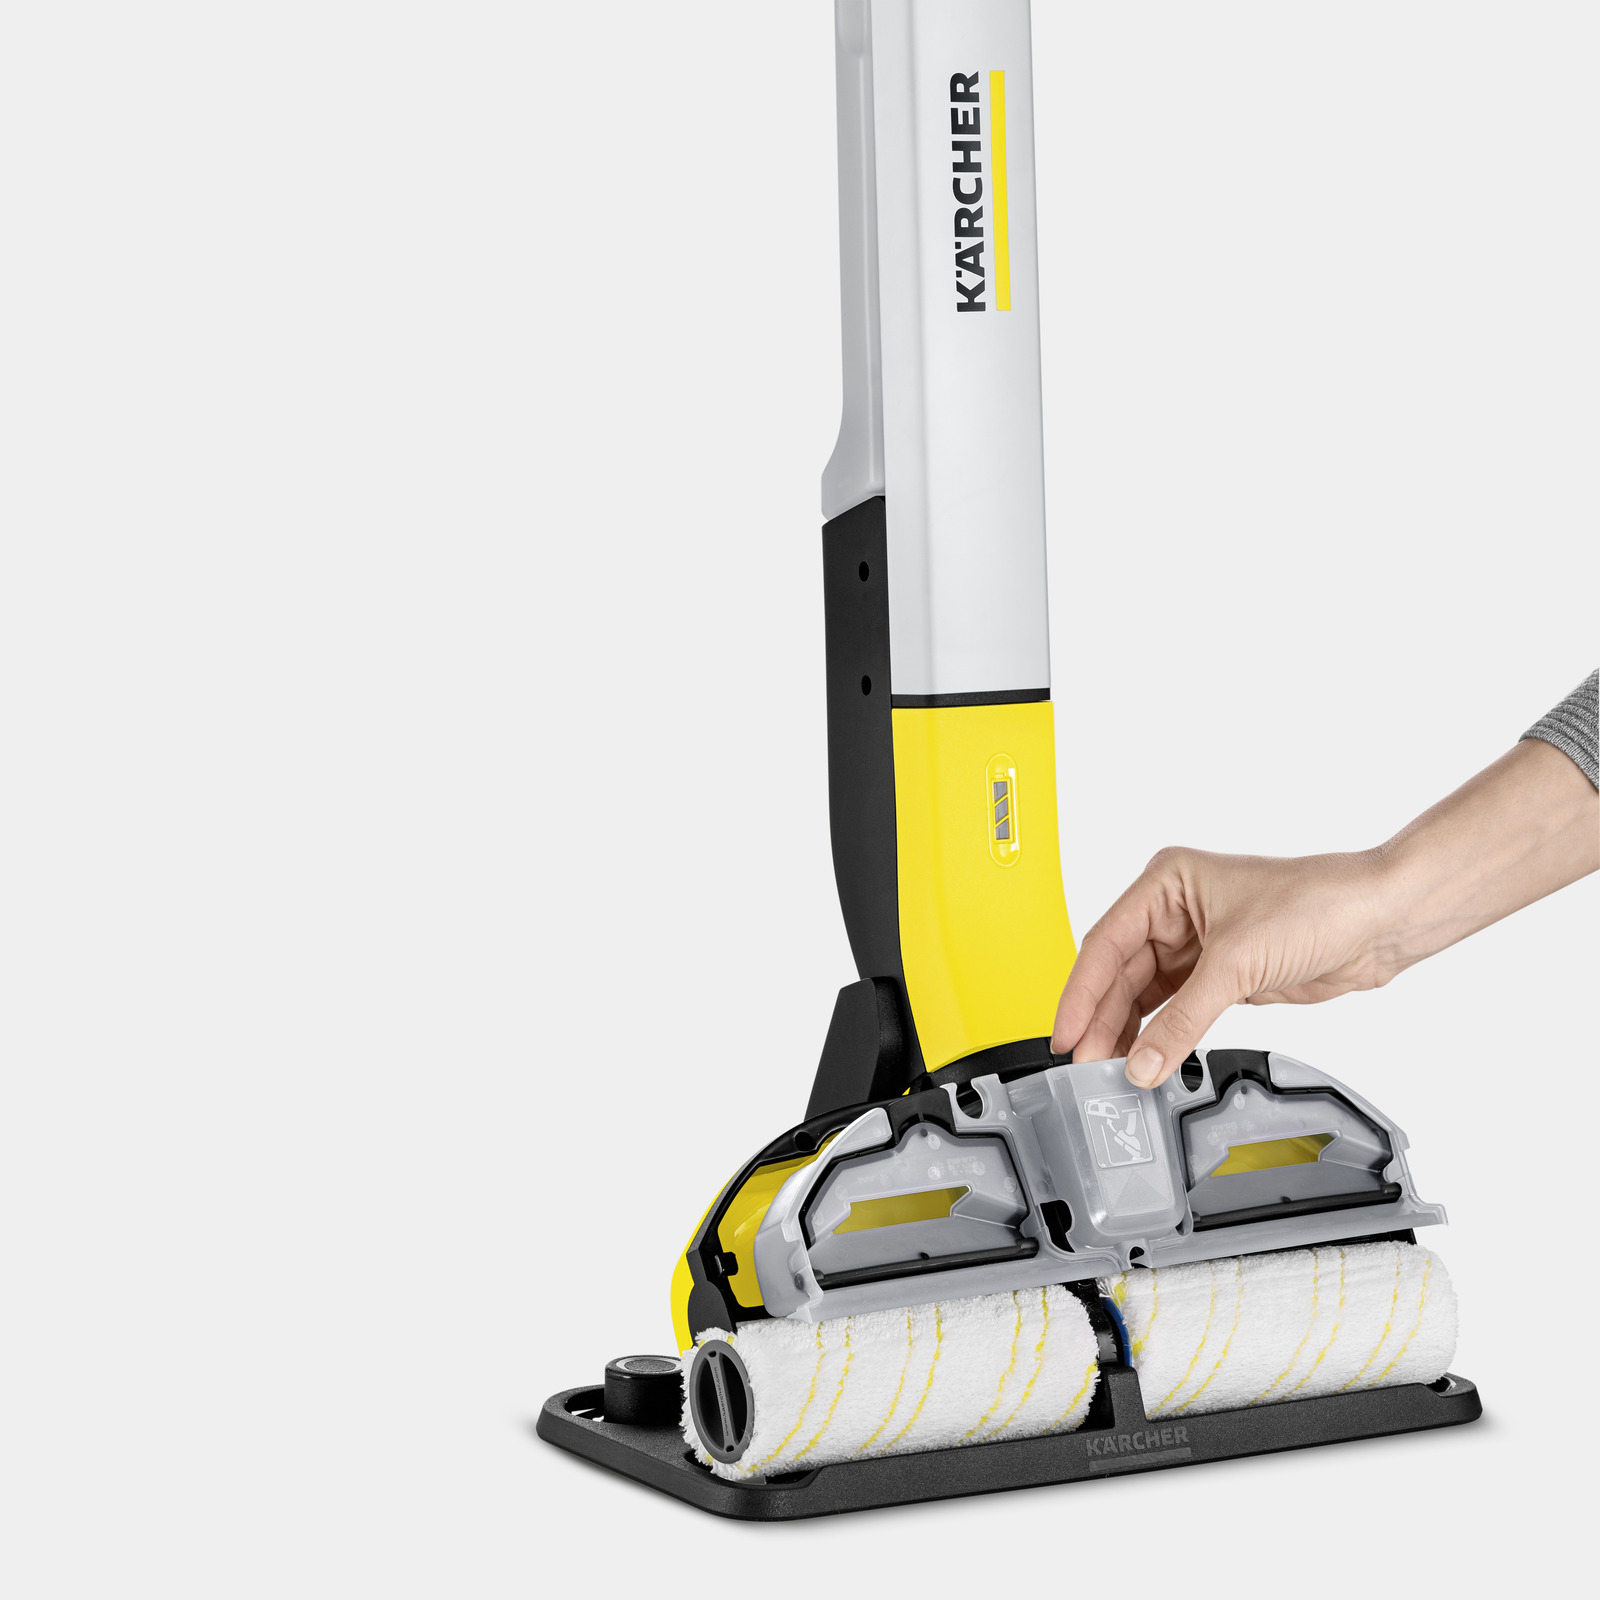 THE ALL NEW FC 7 CORDLESS..The all-in-one cordless hard floor